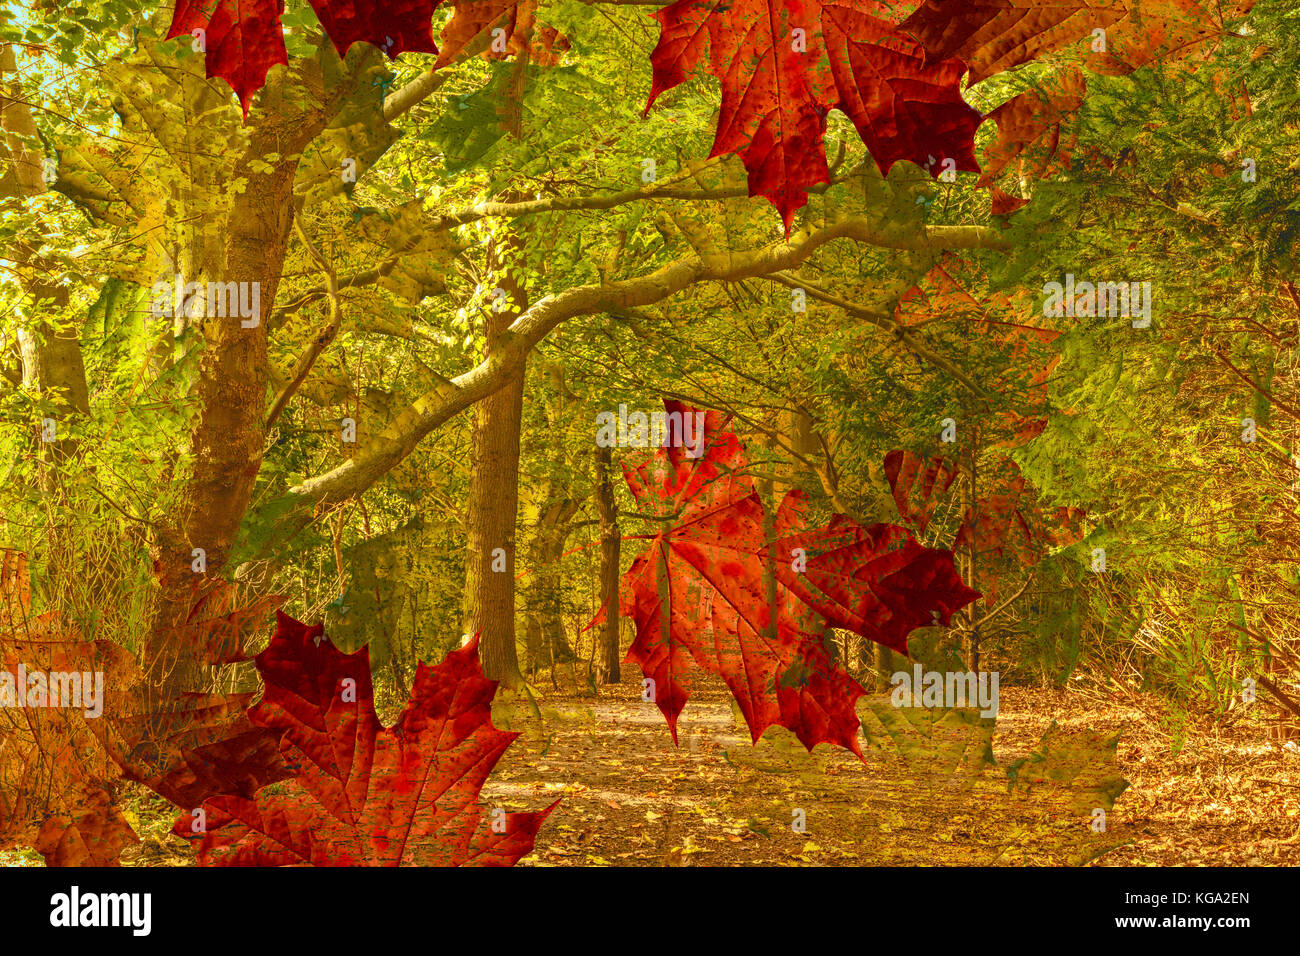 Falling maple leaves in woodland setting, Pan van Persijn ( Panbos ), Katwijk, South Holland, The Netherlands, Europe. Stock Photo